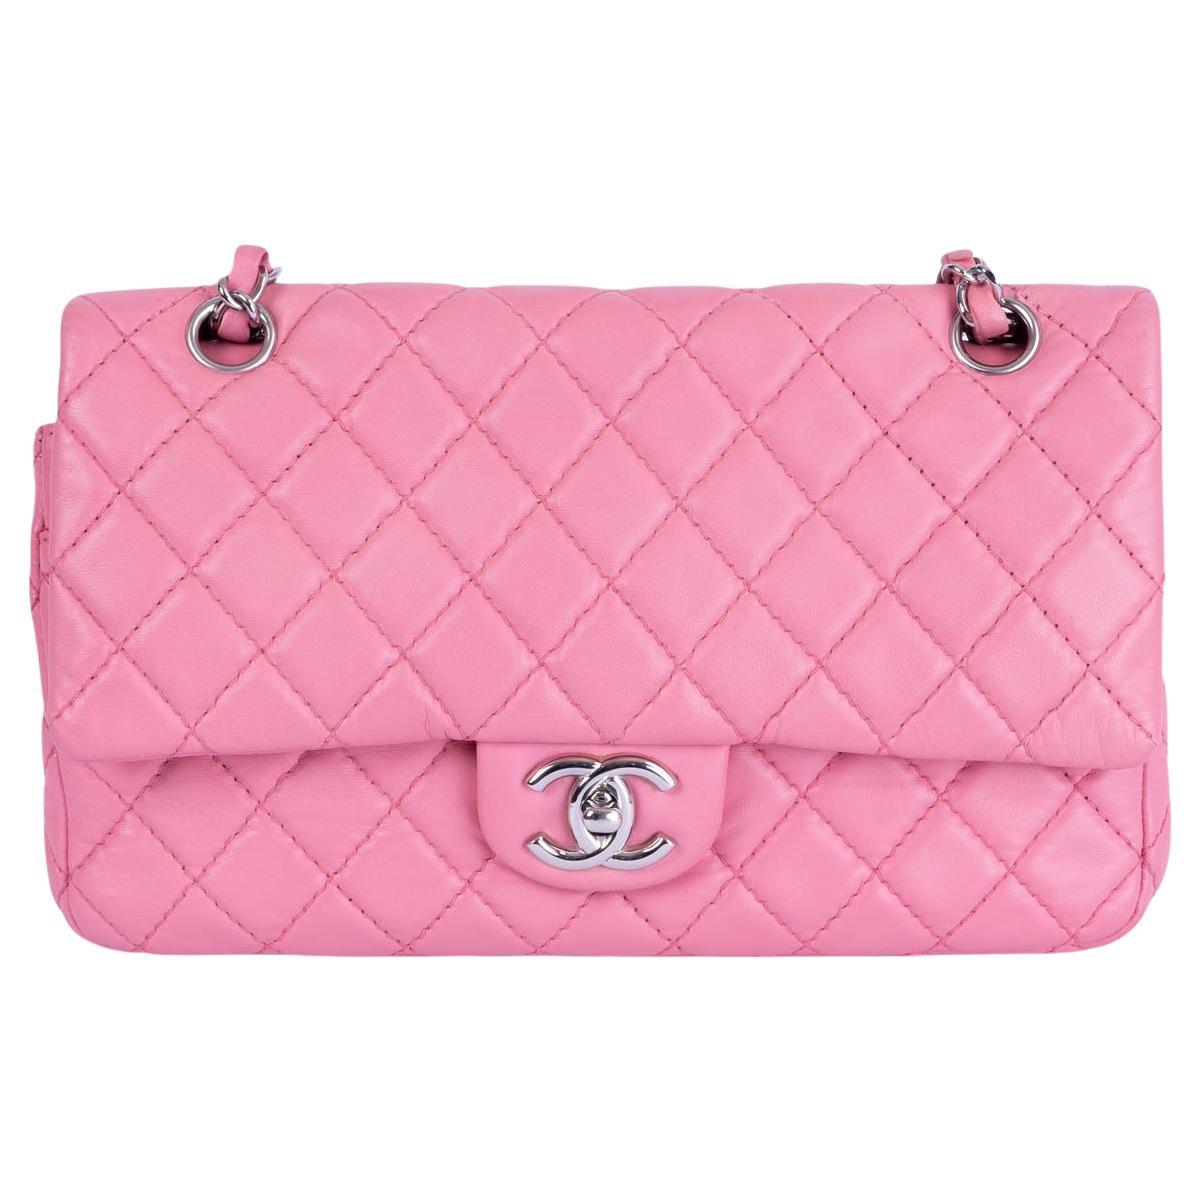 Chanel Pink Quilted Lambskin Leather Soft Classic Medium Timeless Handbag